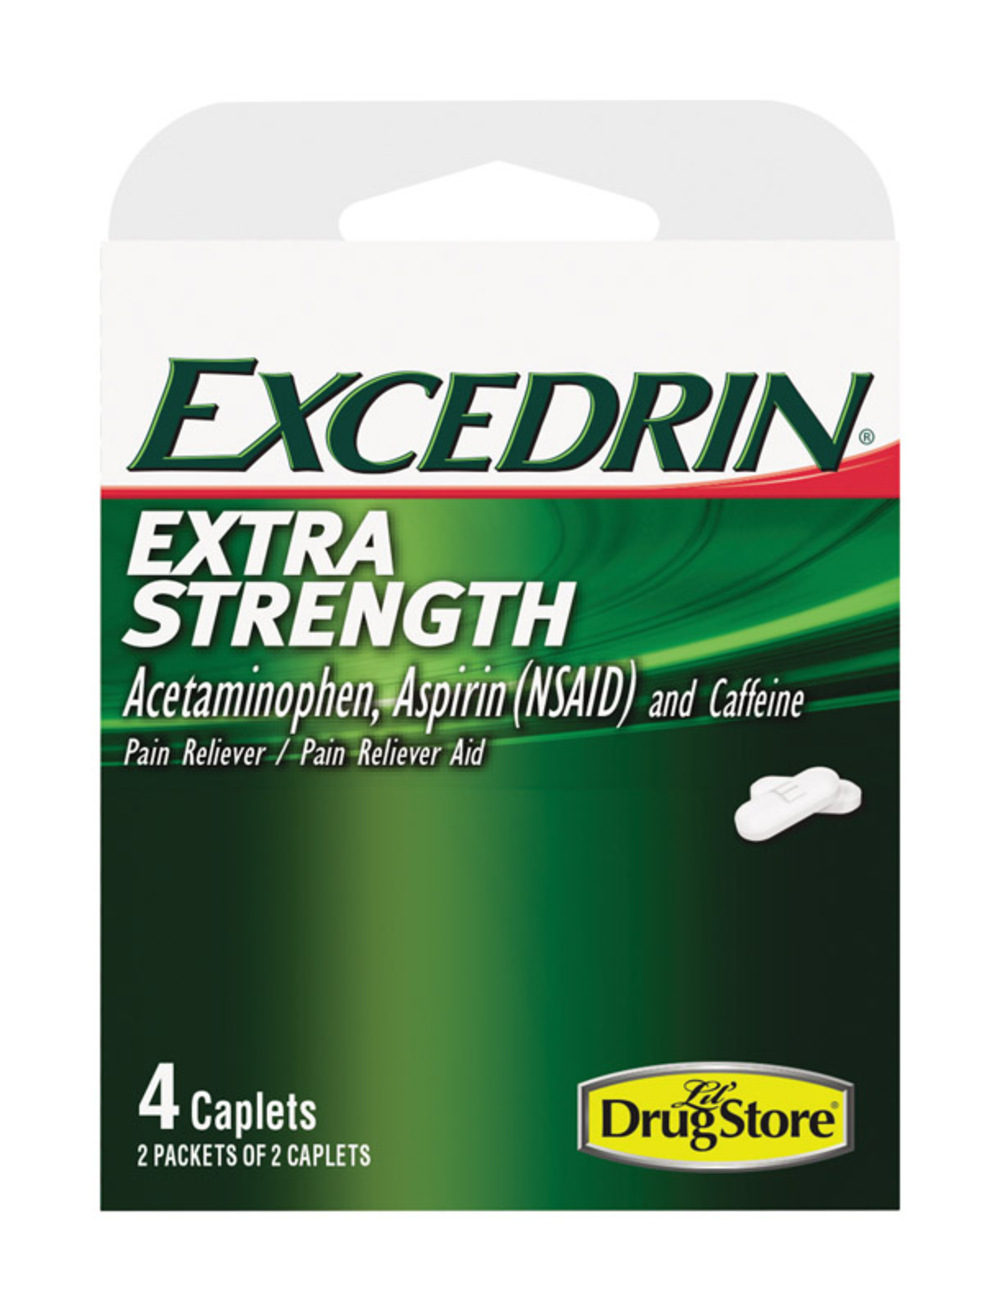 Lil Drug Store Excedrin Extra Strength Acetaminophen & Aspirin Caplets, 4 Count - image 2 of 2